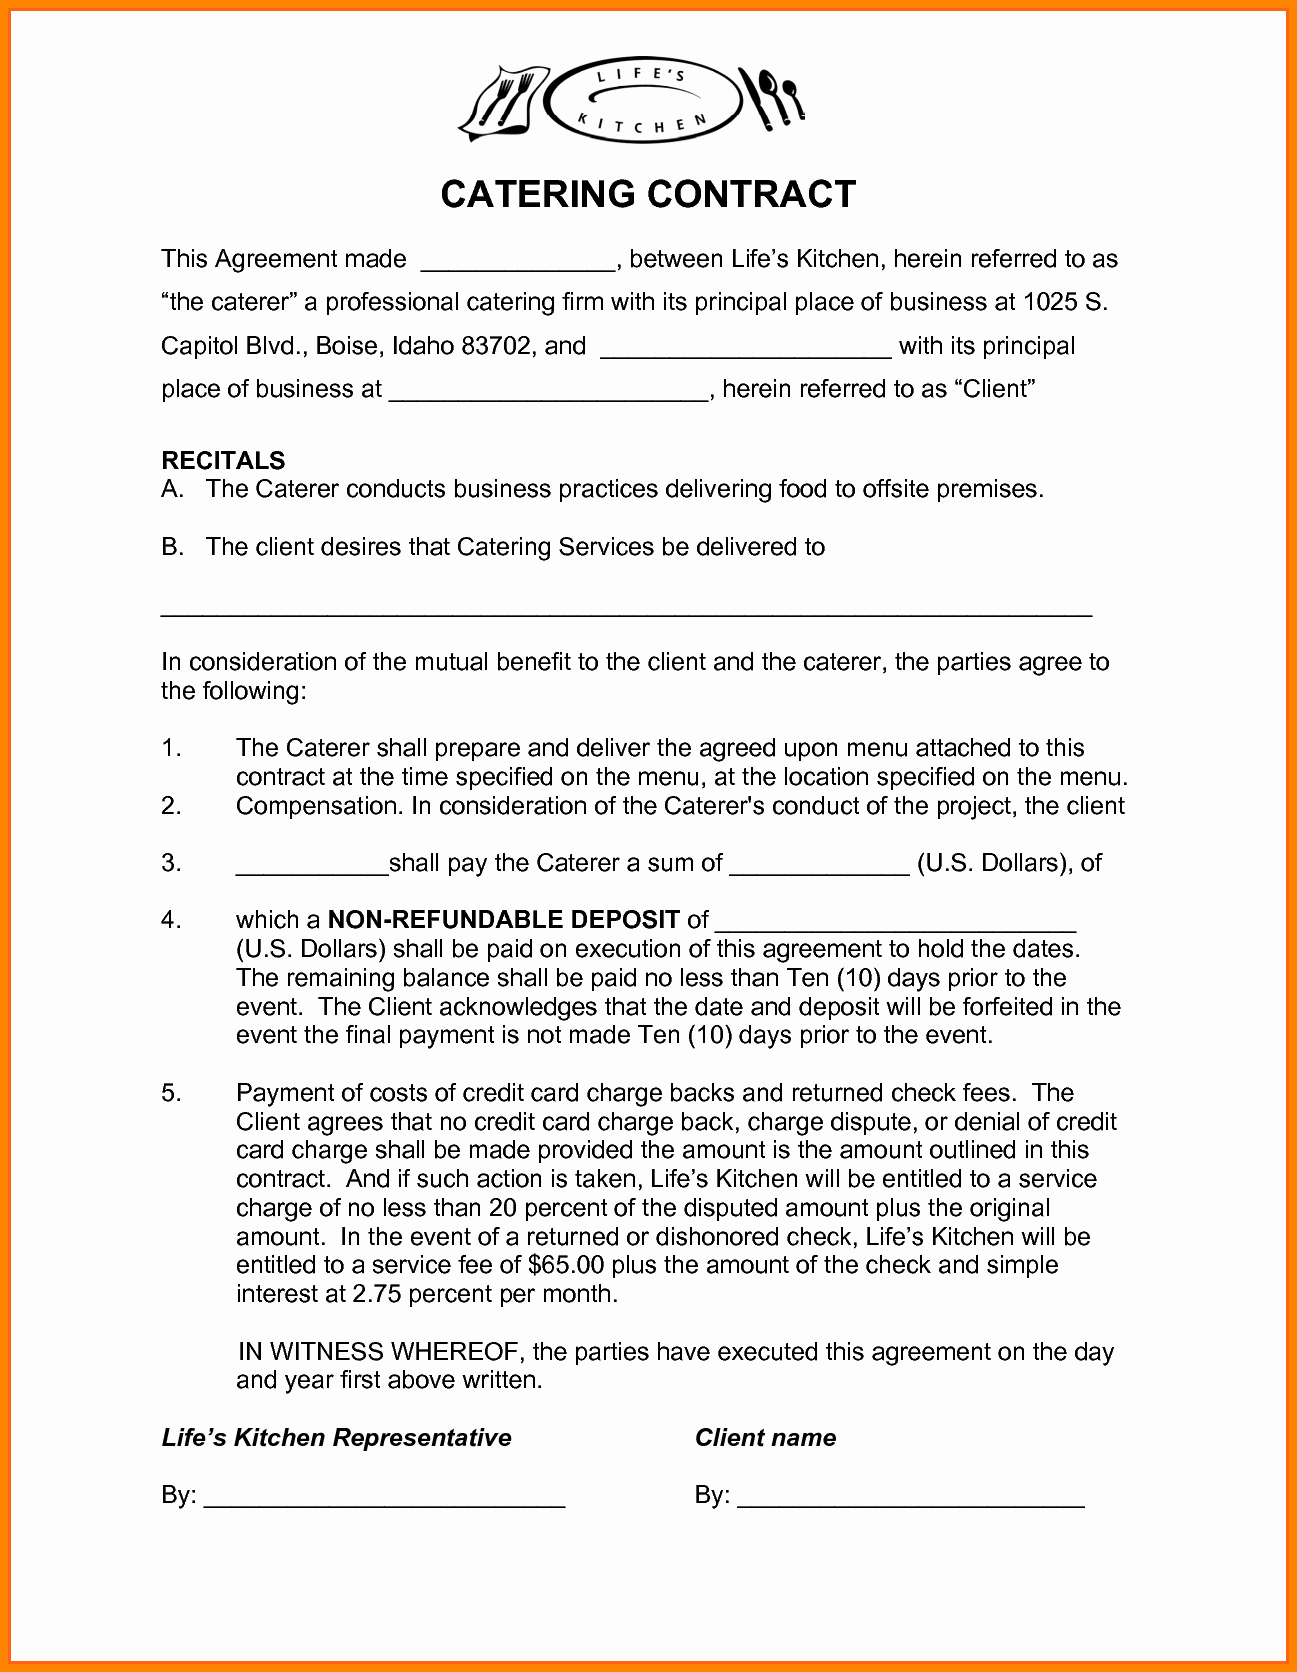 Catering Contract Template Free Lovely Contract S Catering Contract Template Catering